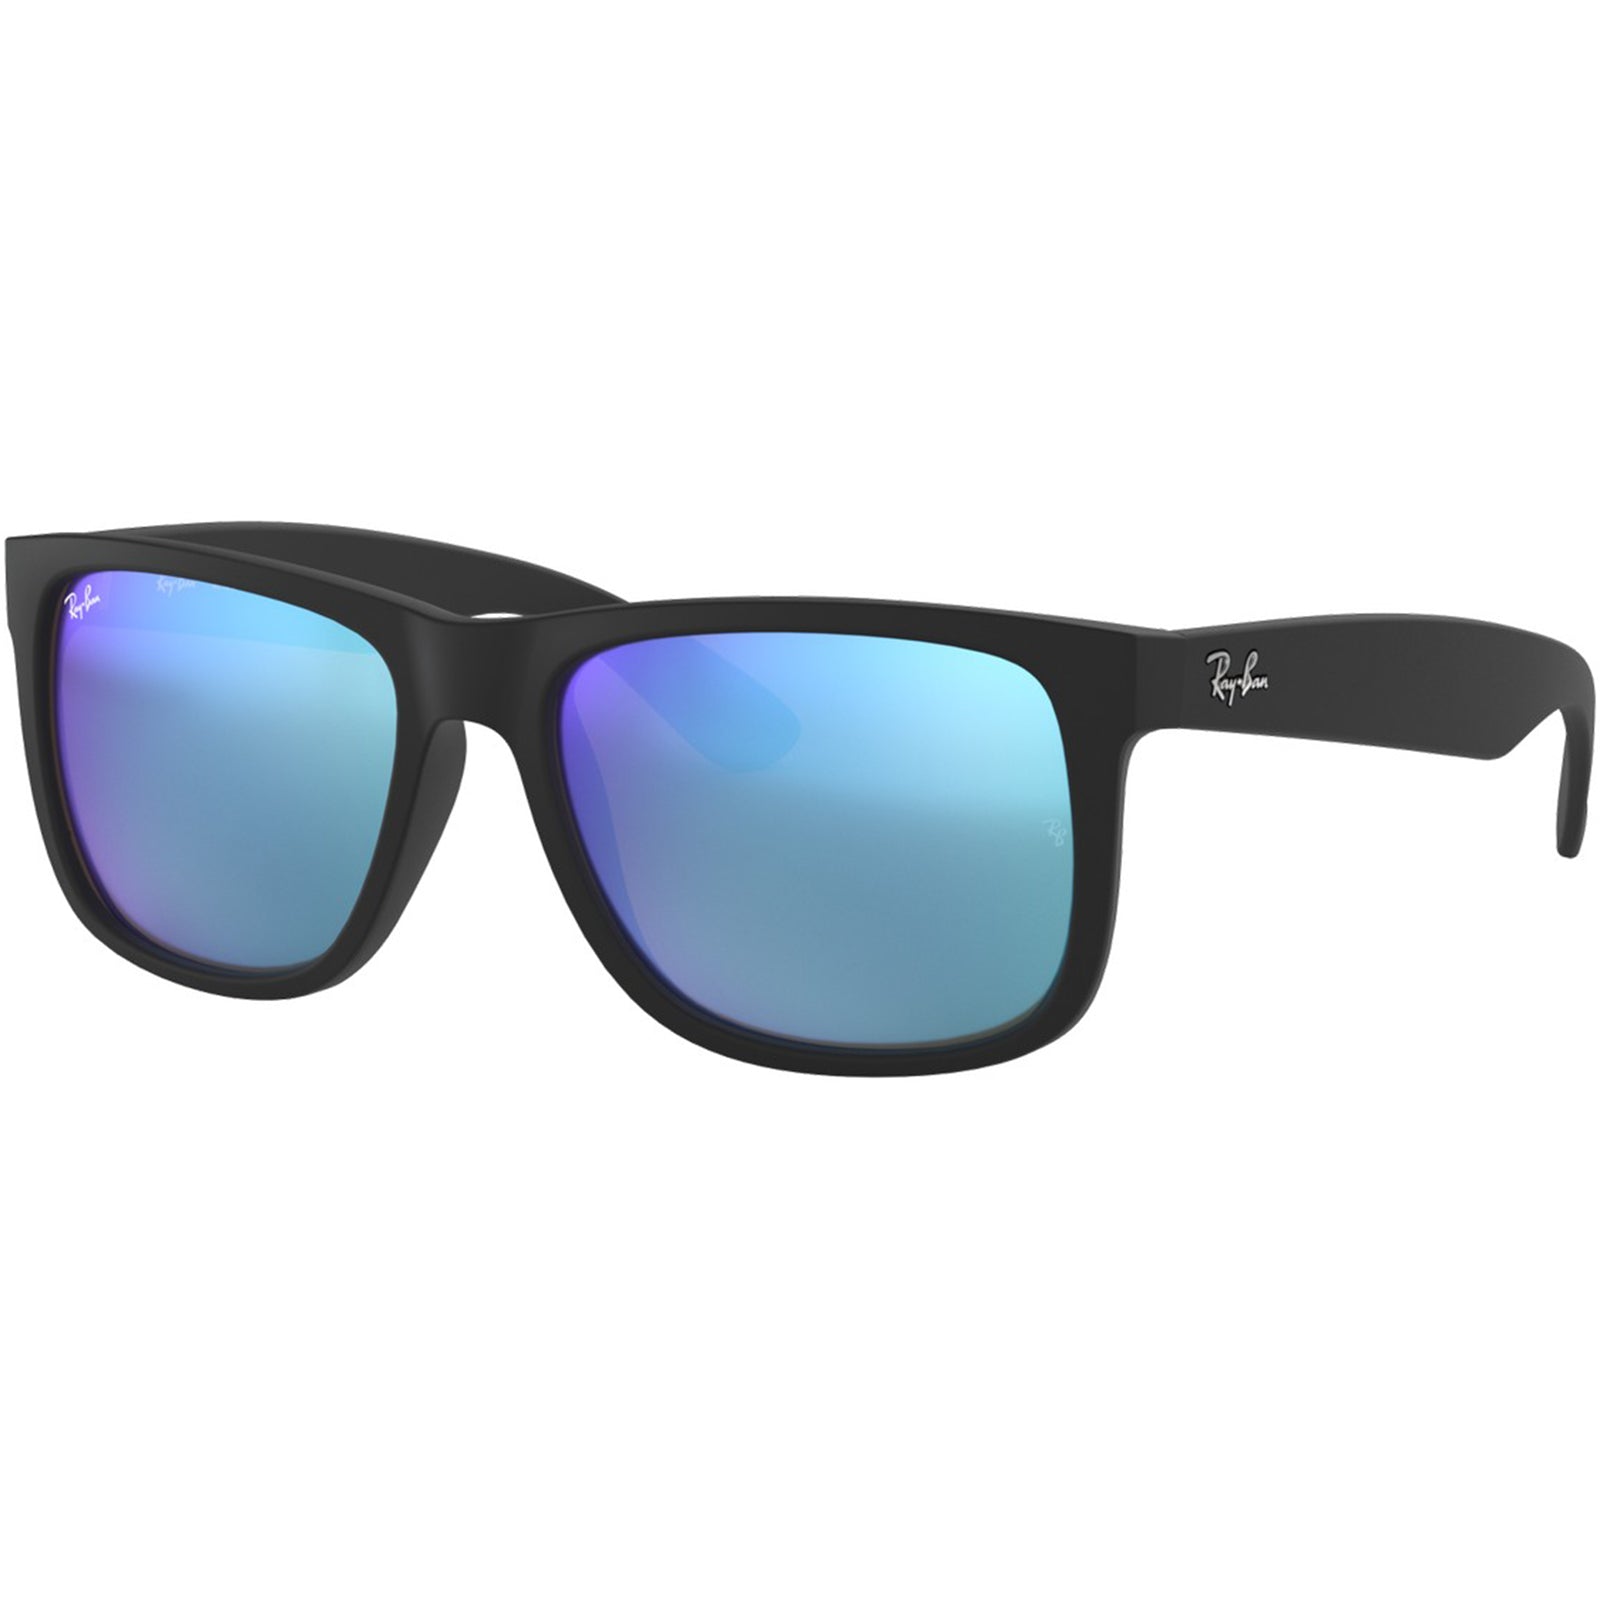 Ray-Ban Justin Color Mix Adult Lifestyle Sunglasses-0RB4165